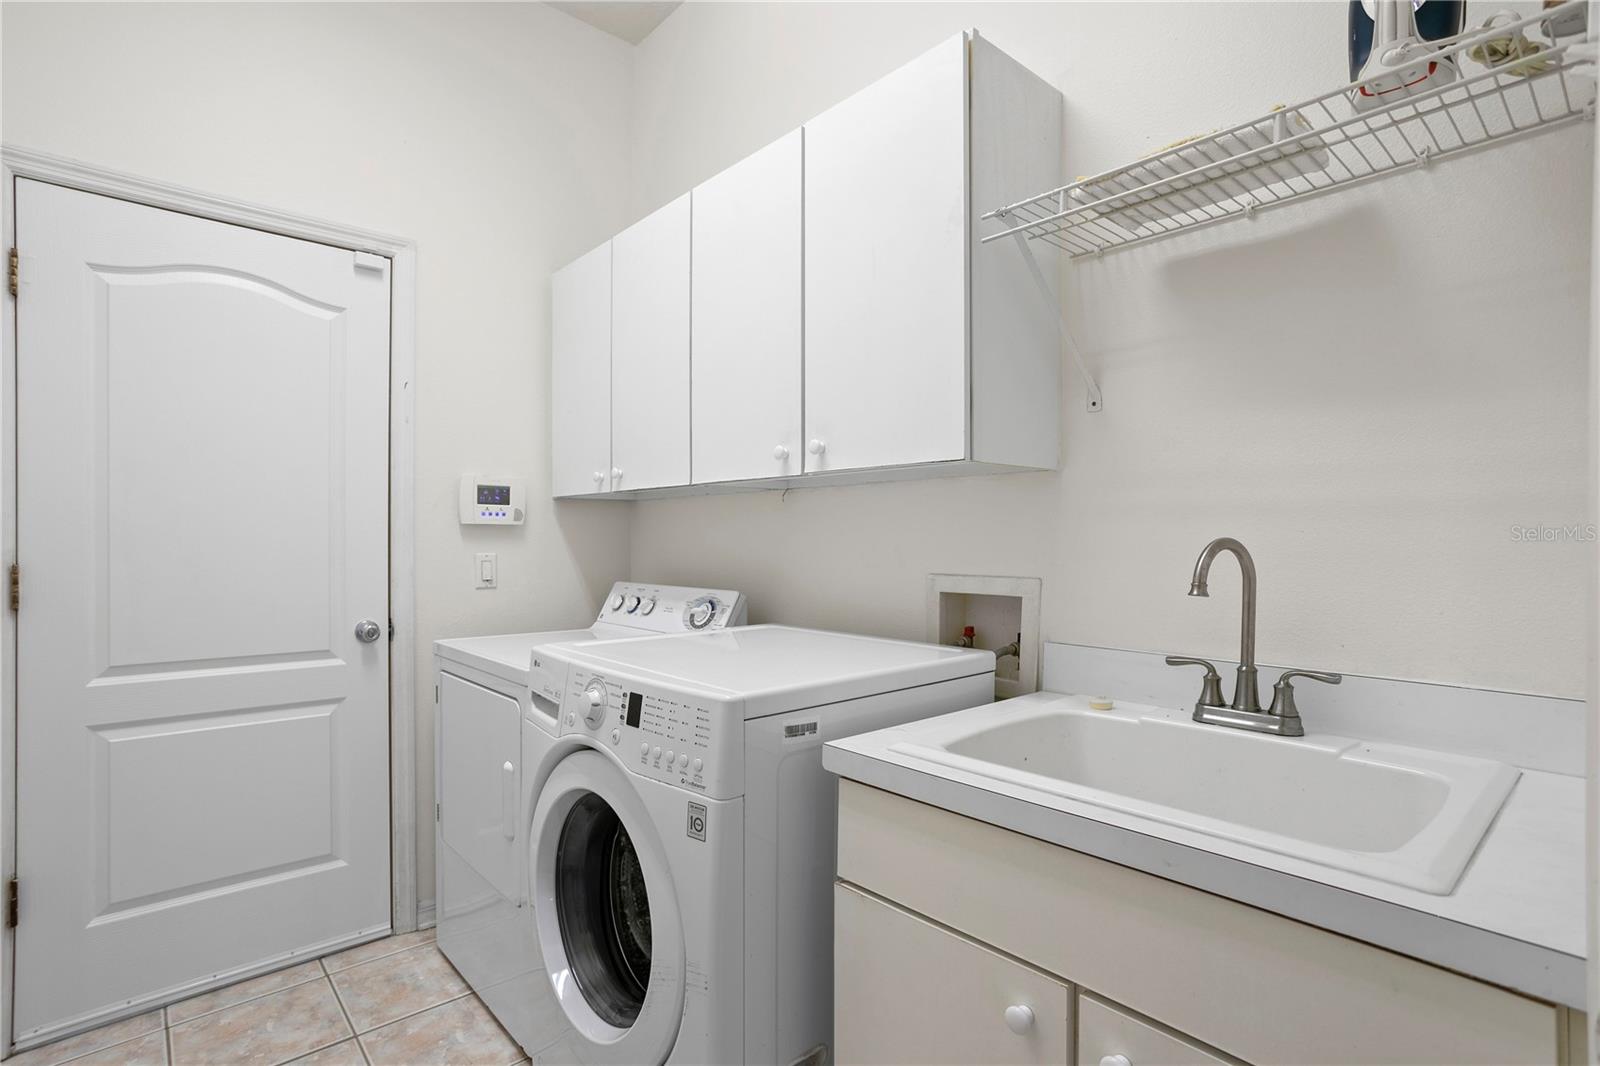 Spacious laundry room with utility sink and cabinetry